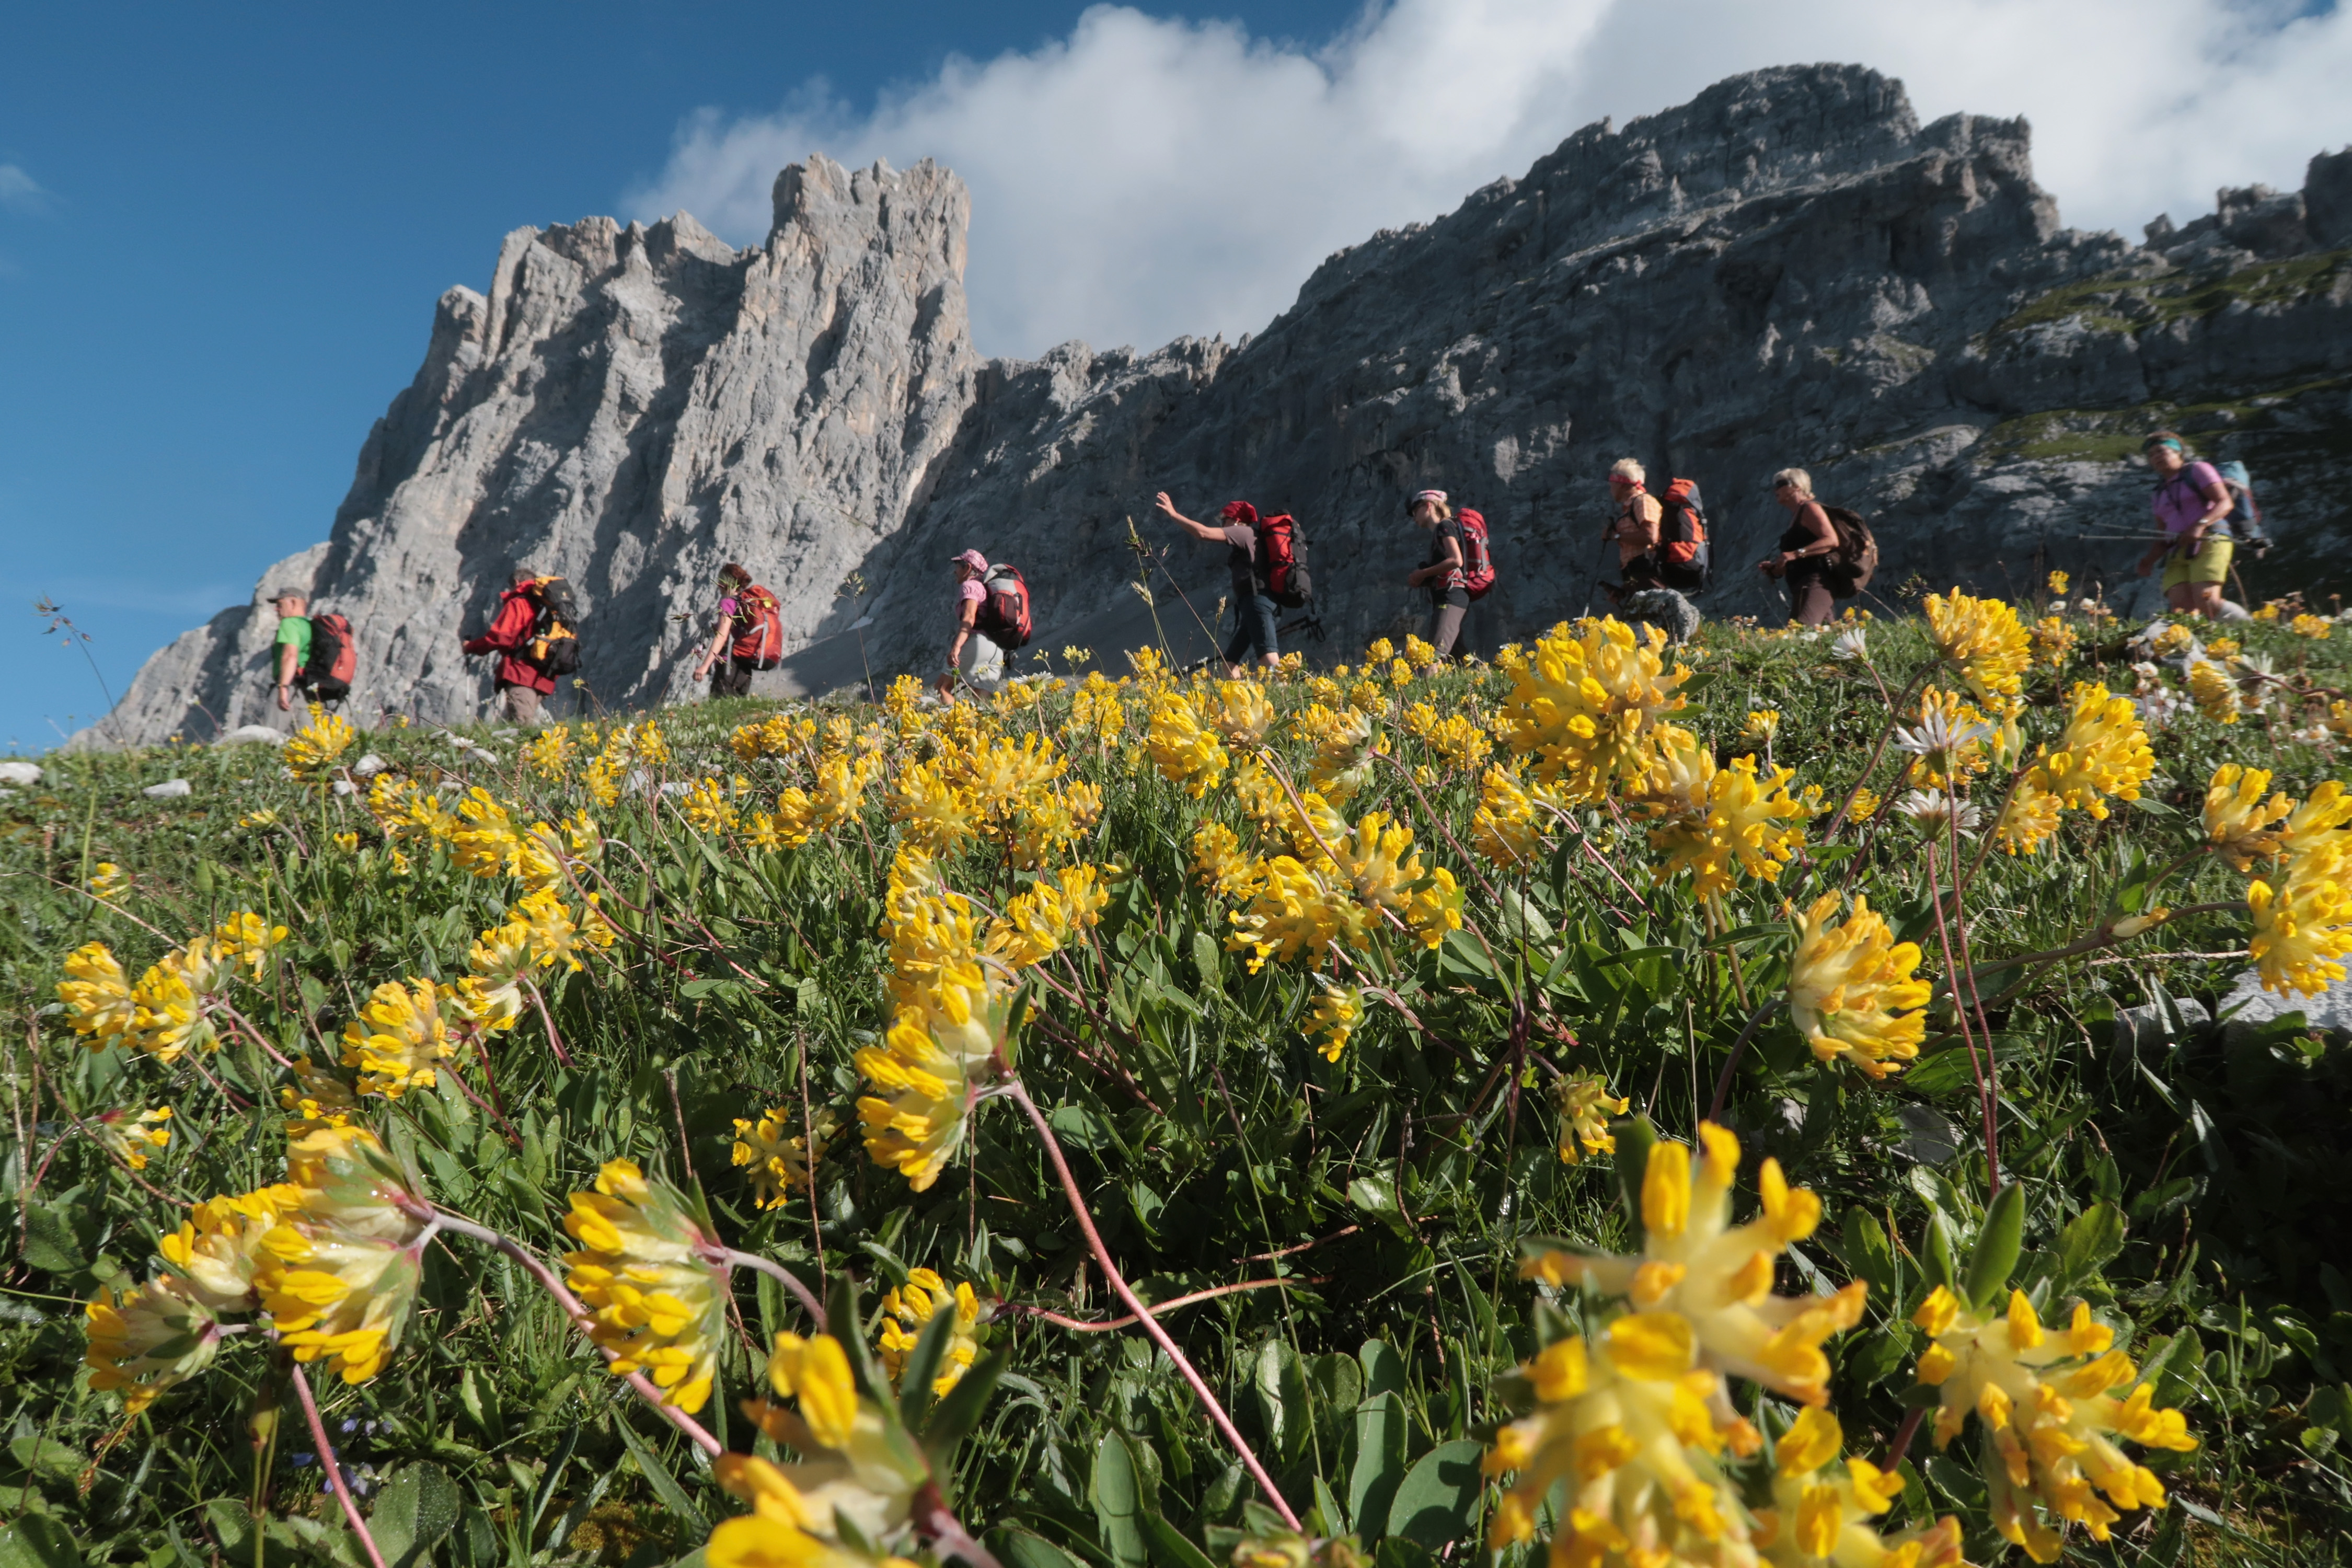 ST. ANTOENIEN, SWITZERLAND - AUGUST 04: Visitors hiking along the southern Raetikon Hoehenweg trail walk past a meadow of yellow wildflowers in the Raetikon mountain range on August 4, 2016 near St. Antoenien, Switzerland. The Raetikon mountains, part of the Central Eastern Alps, straddle the borders between Liechtenstein, Switzerland and Austria in a region where a break-away African tectonic plate has clashed with European sheets, resulting in a rich geology that fosters a wide variety of wildflowers. The mountains, with their Sulzfluh and Schesaplana peaks, are also a popular destination for hikers and climbers.  (Photo by Sean Gallup/Getty Images)